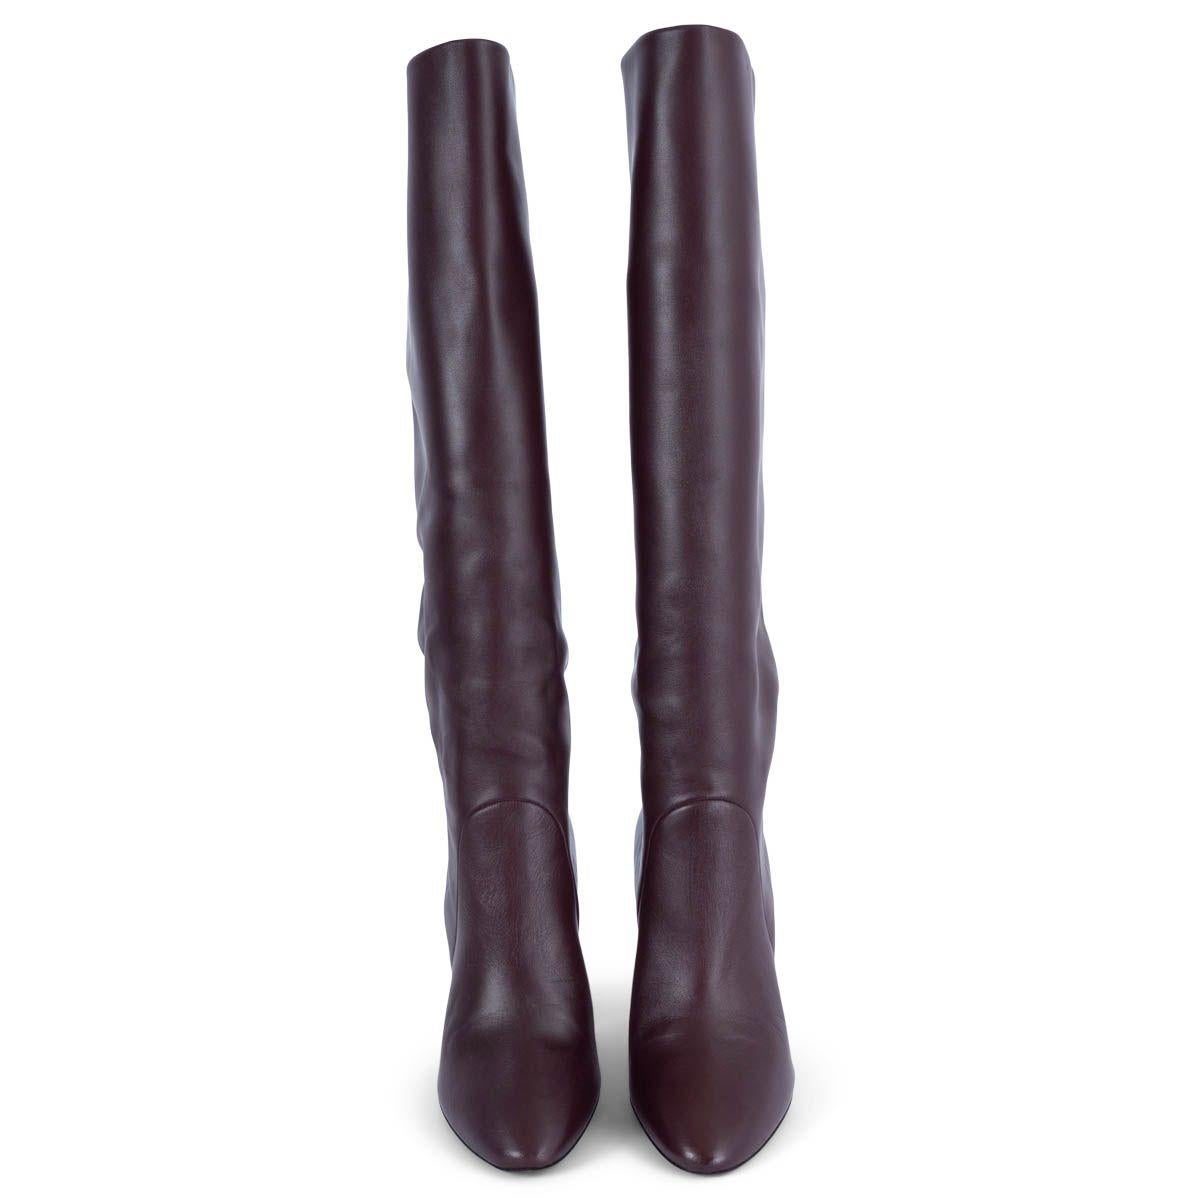 100% authentic Saint Laurent Lou 95 knee-high boots in burgundy butter soft leather. Feature a block heel and almond toe. Have been worn and are in excellent condition.

Measurements
Imprinted Size	37.5
Shoe Size	37.5
Inside Sole	24.5cm